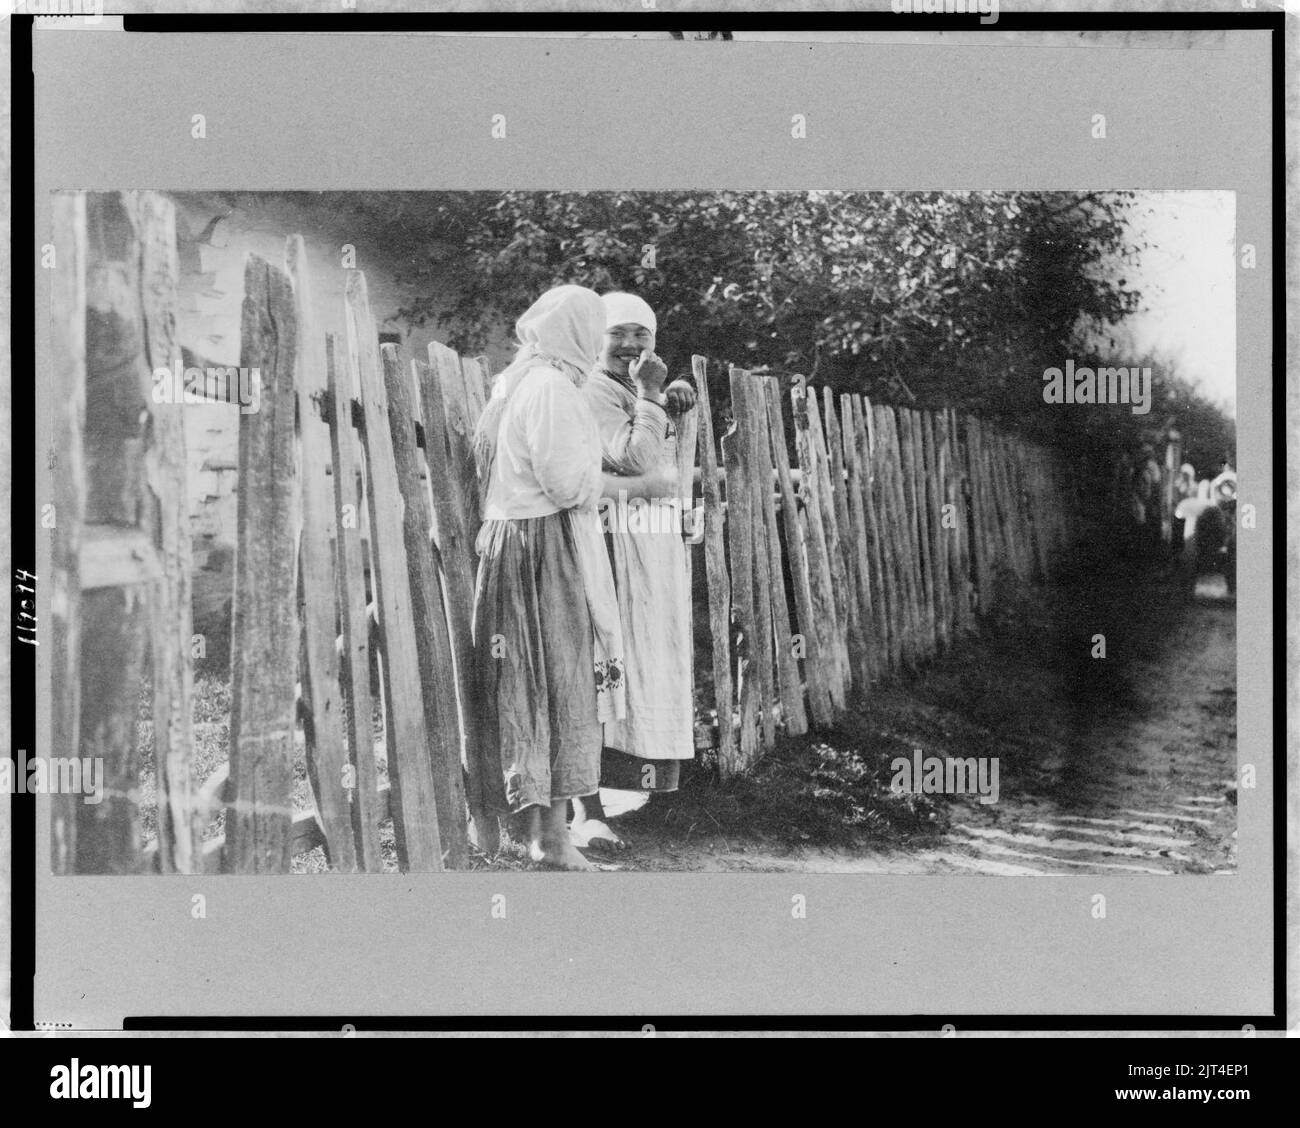 Two peasant women standing along wooden fence, Russia Stock Photo